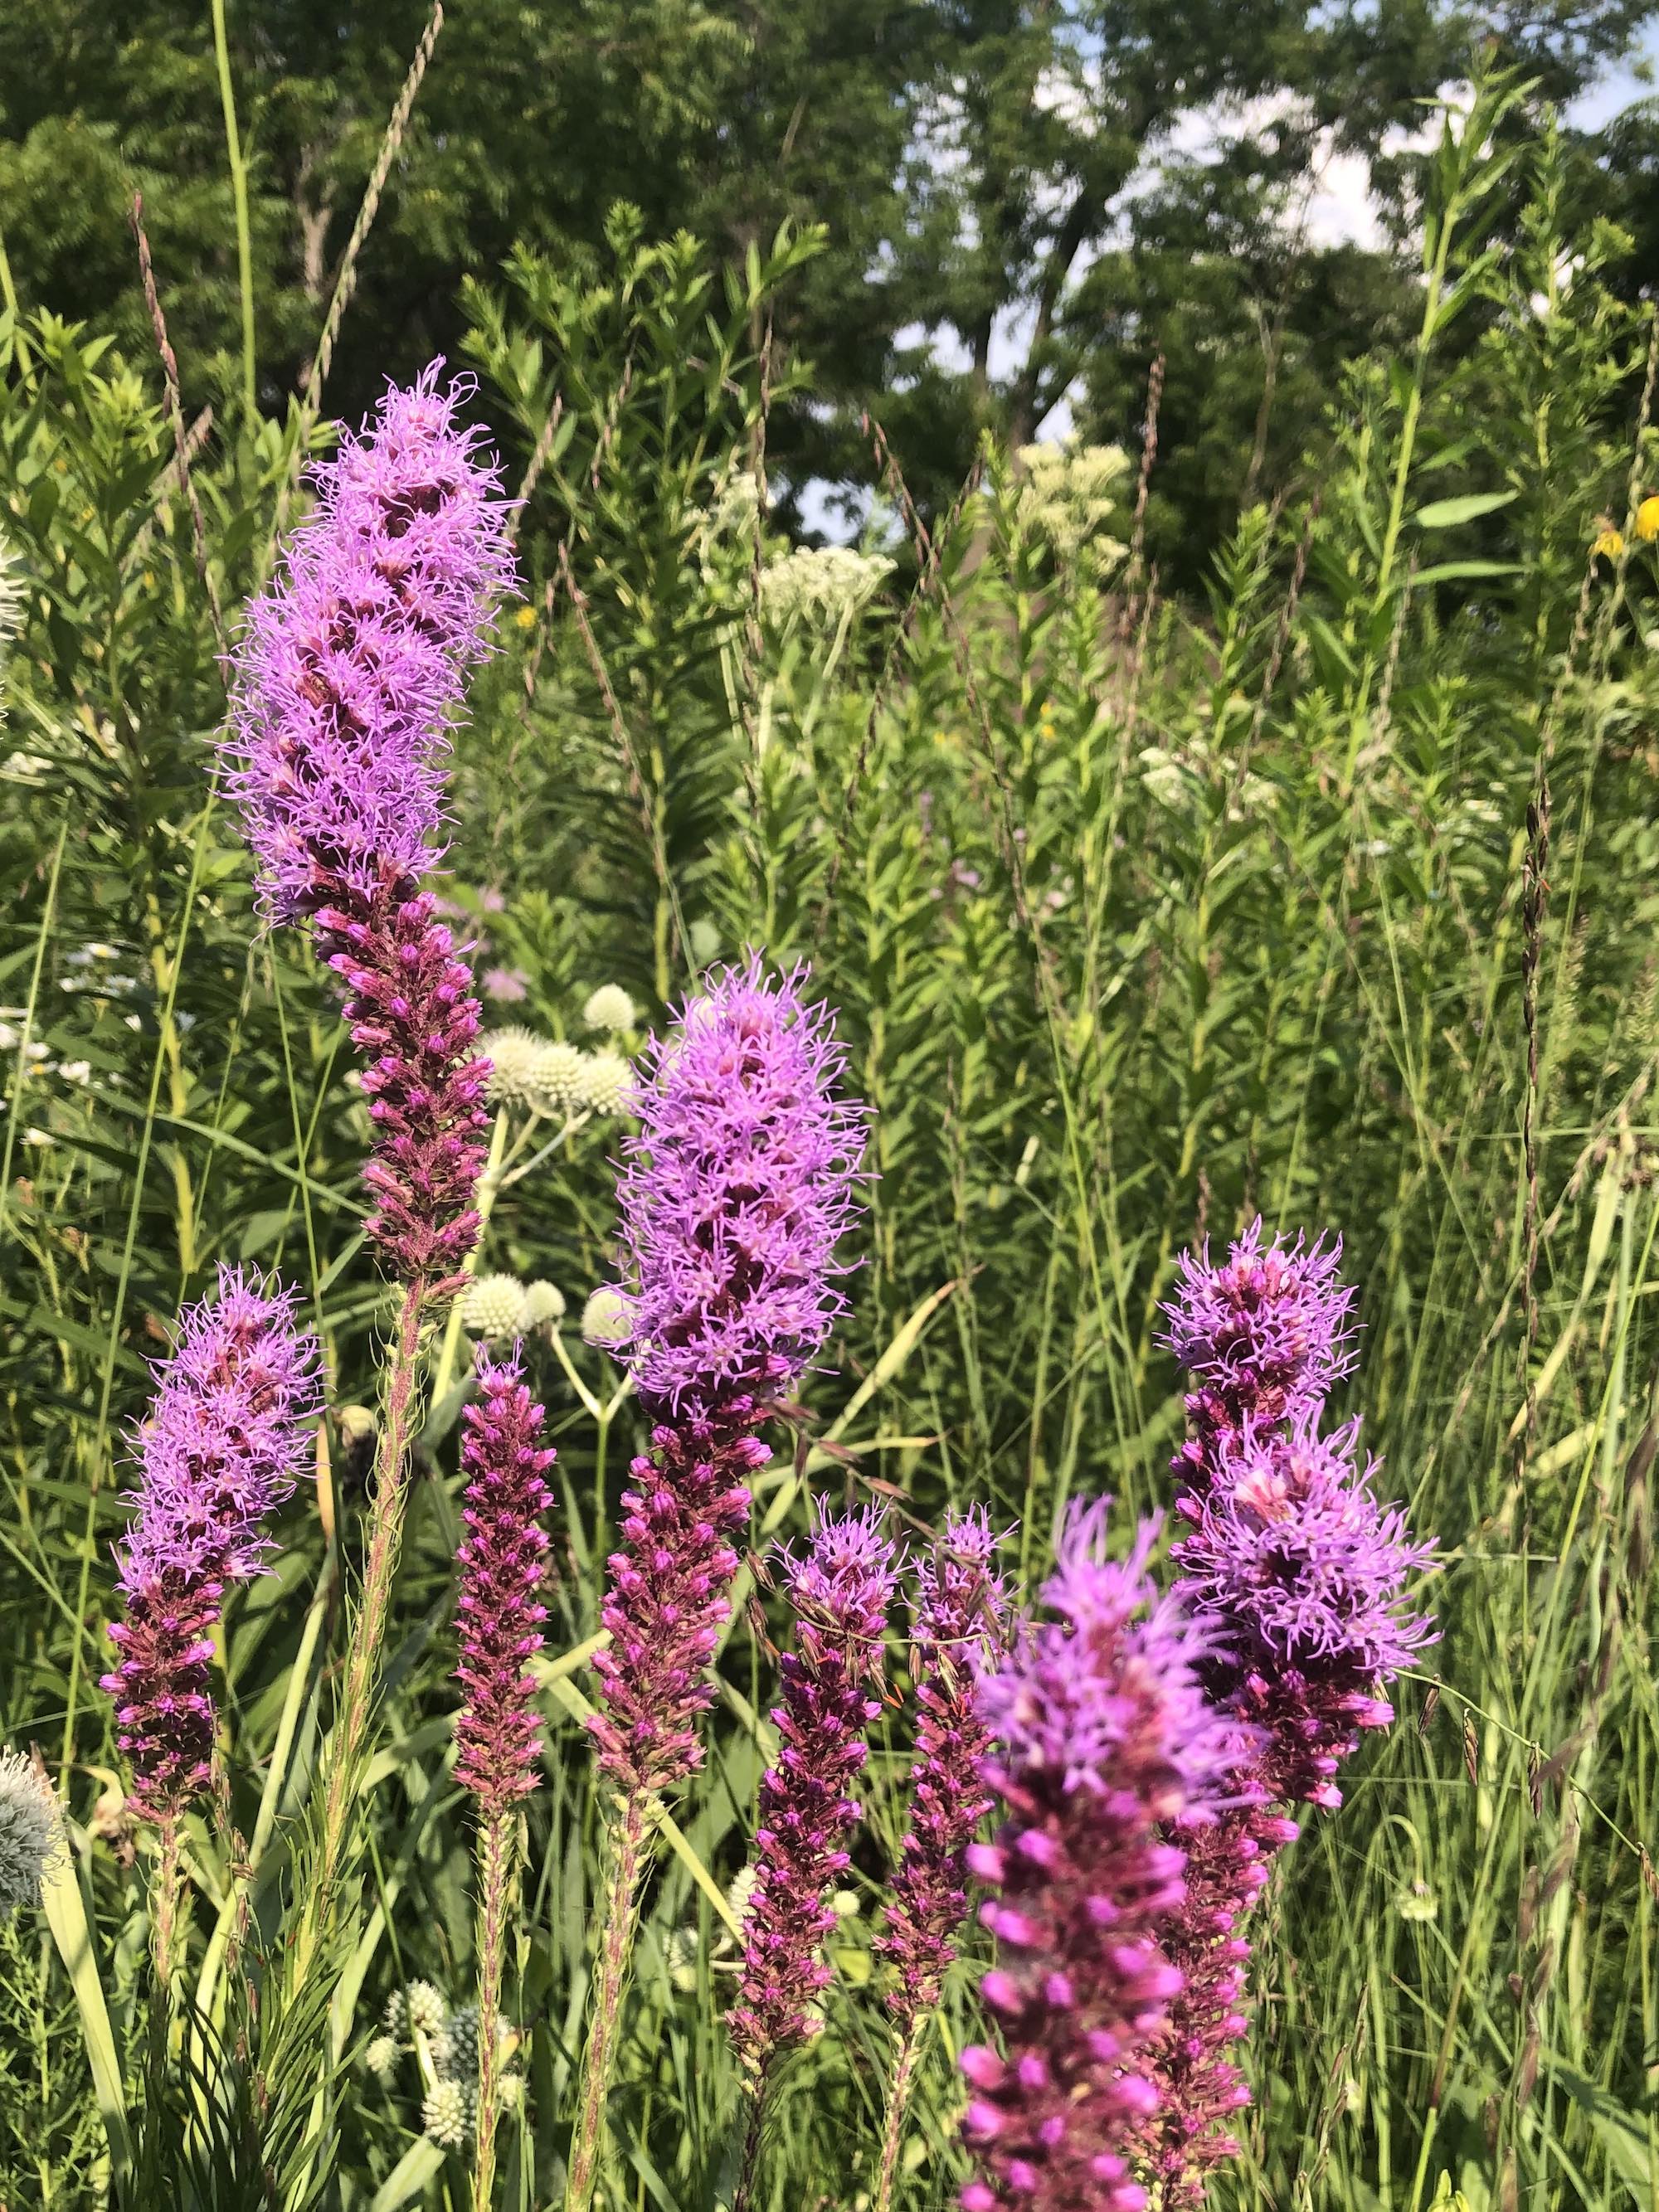 Dense Blazing Star off of Bike Path behind Gregory Street in Madison, Wisconsin on July 16, 2021.